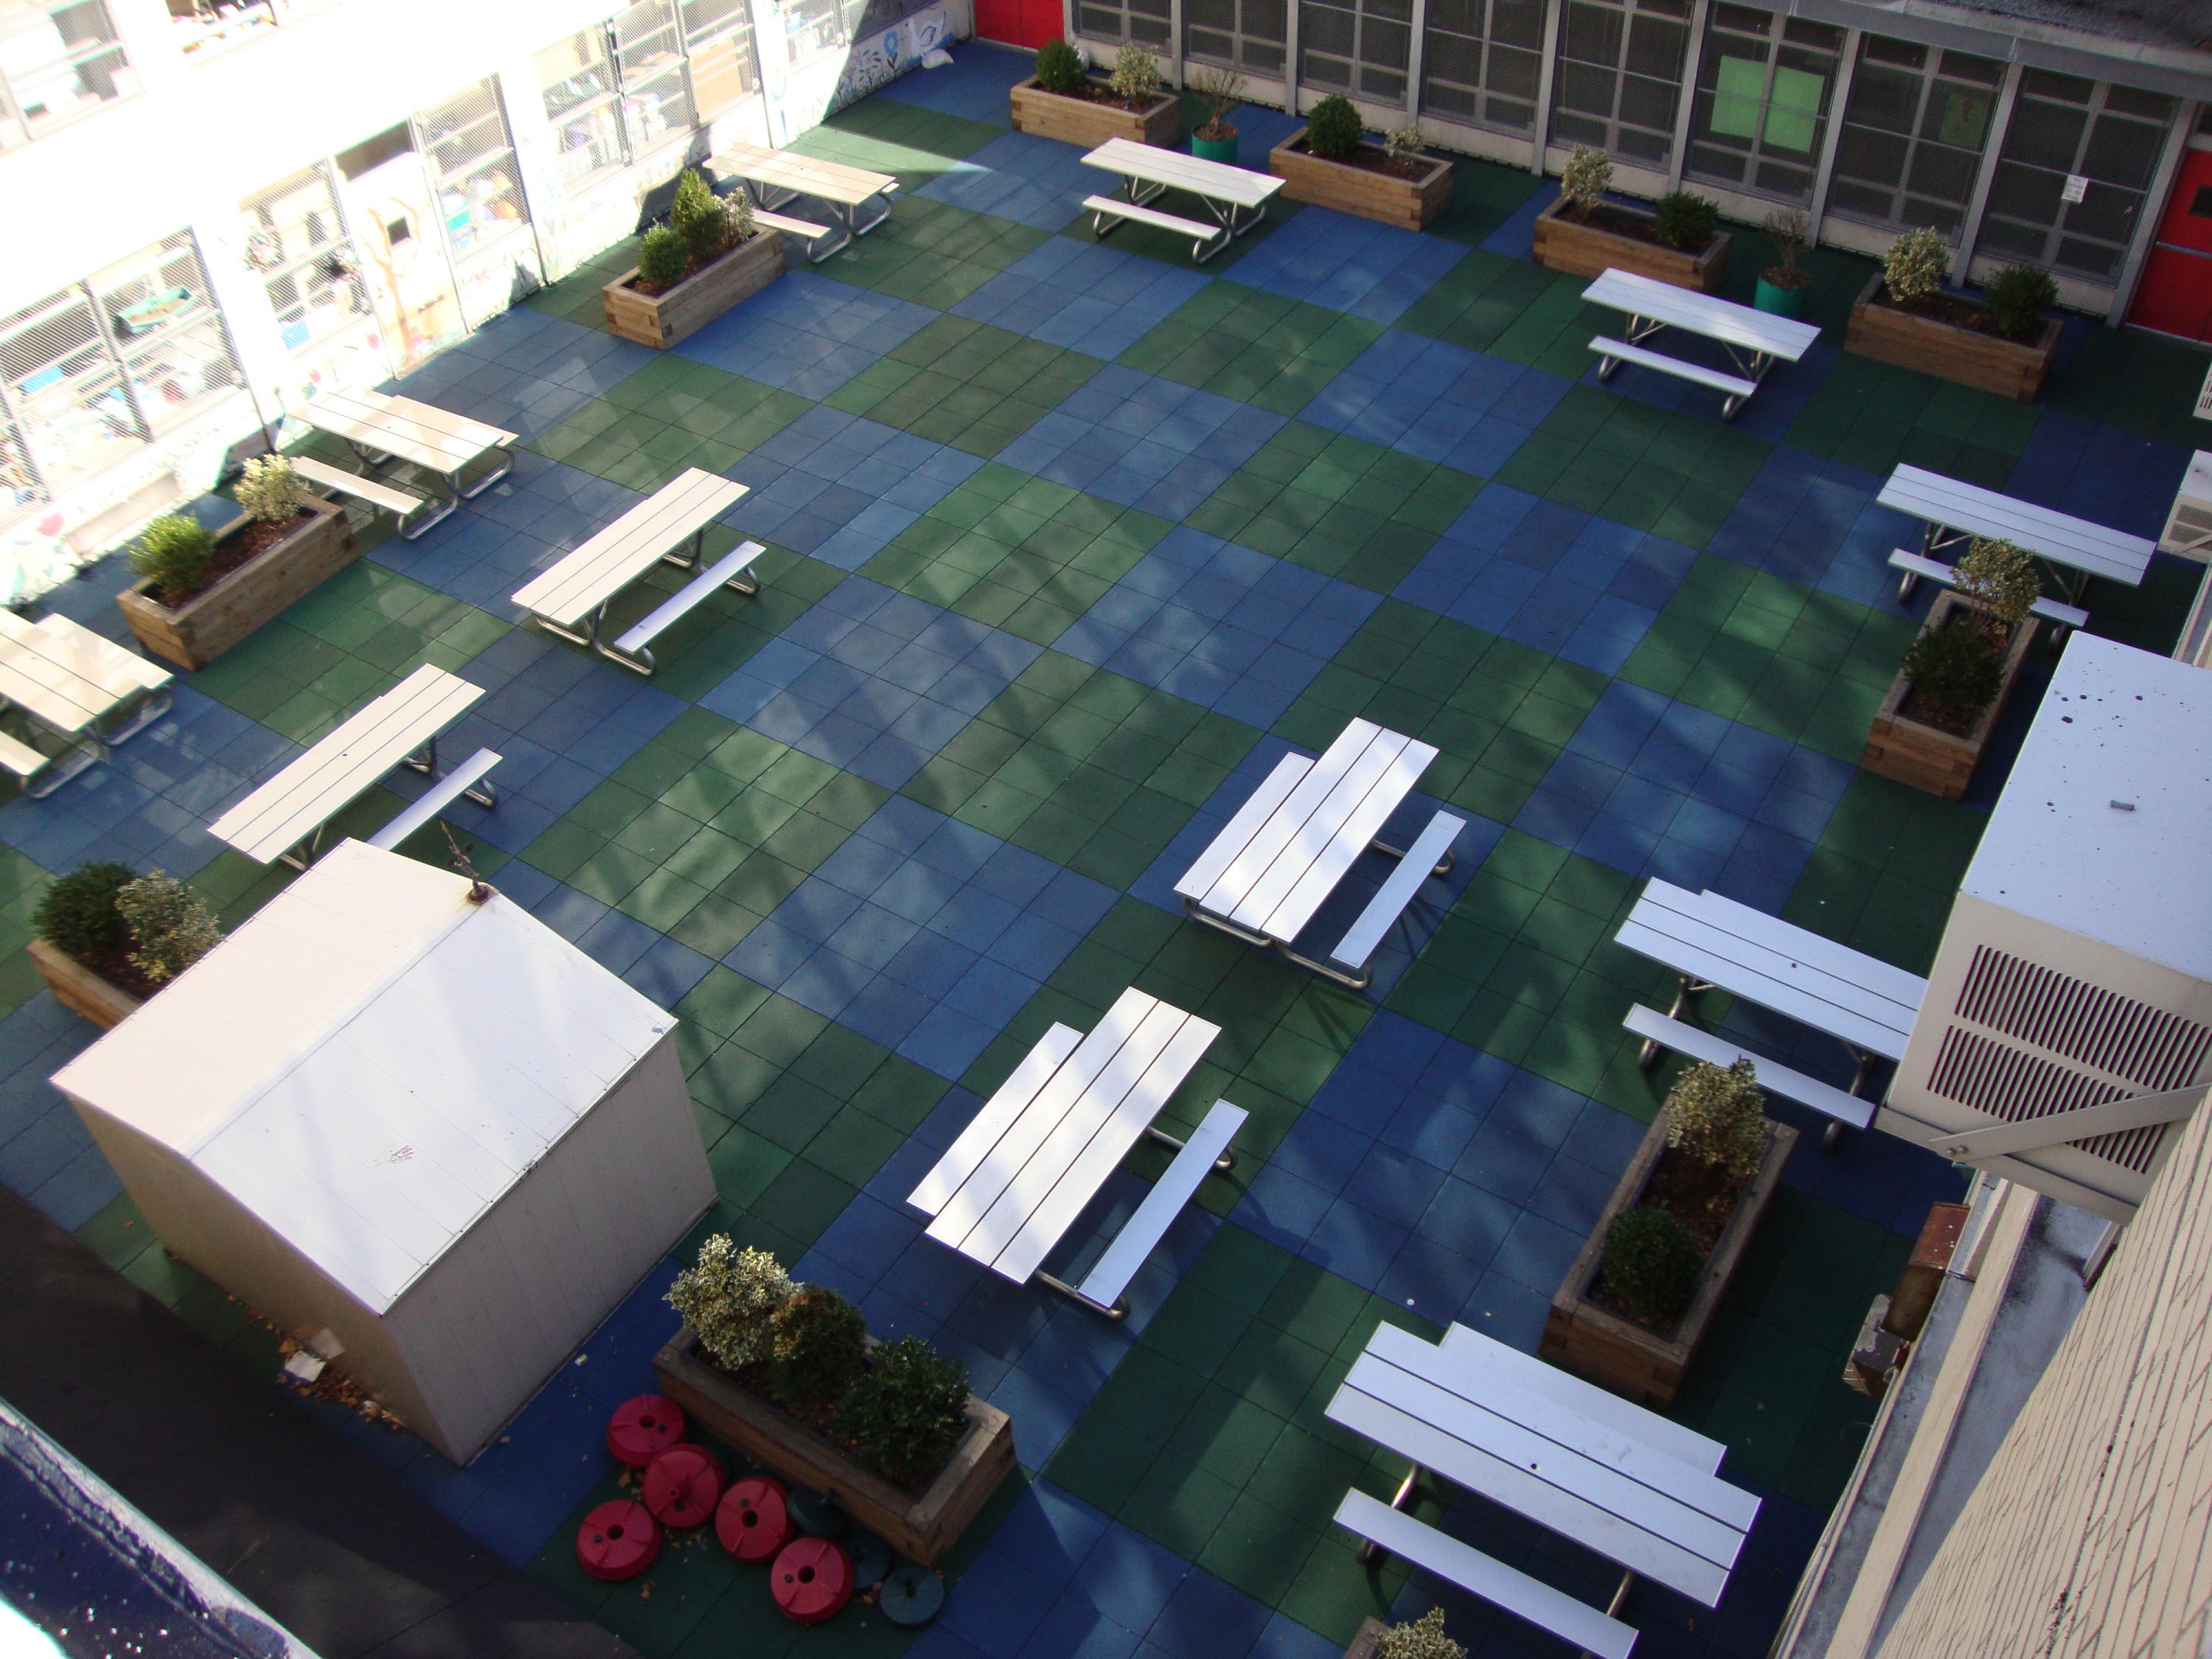 Public School Recreational Rooftop Playground Area Over Concrete Pavers